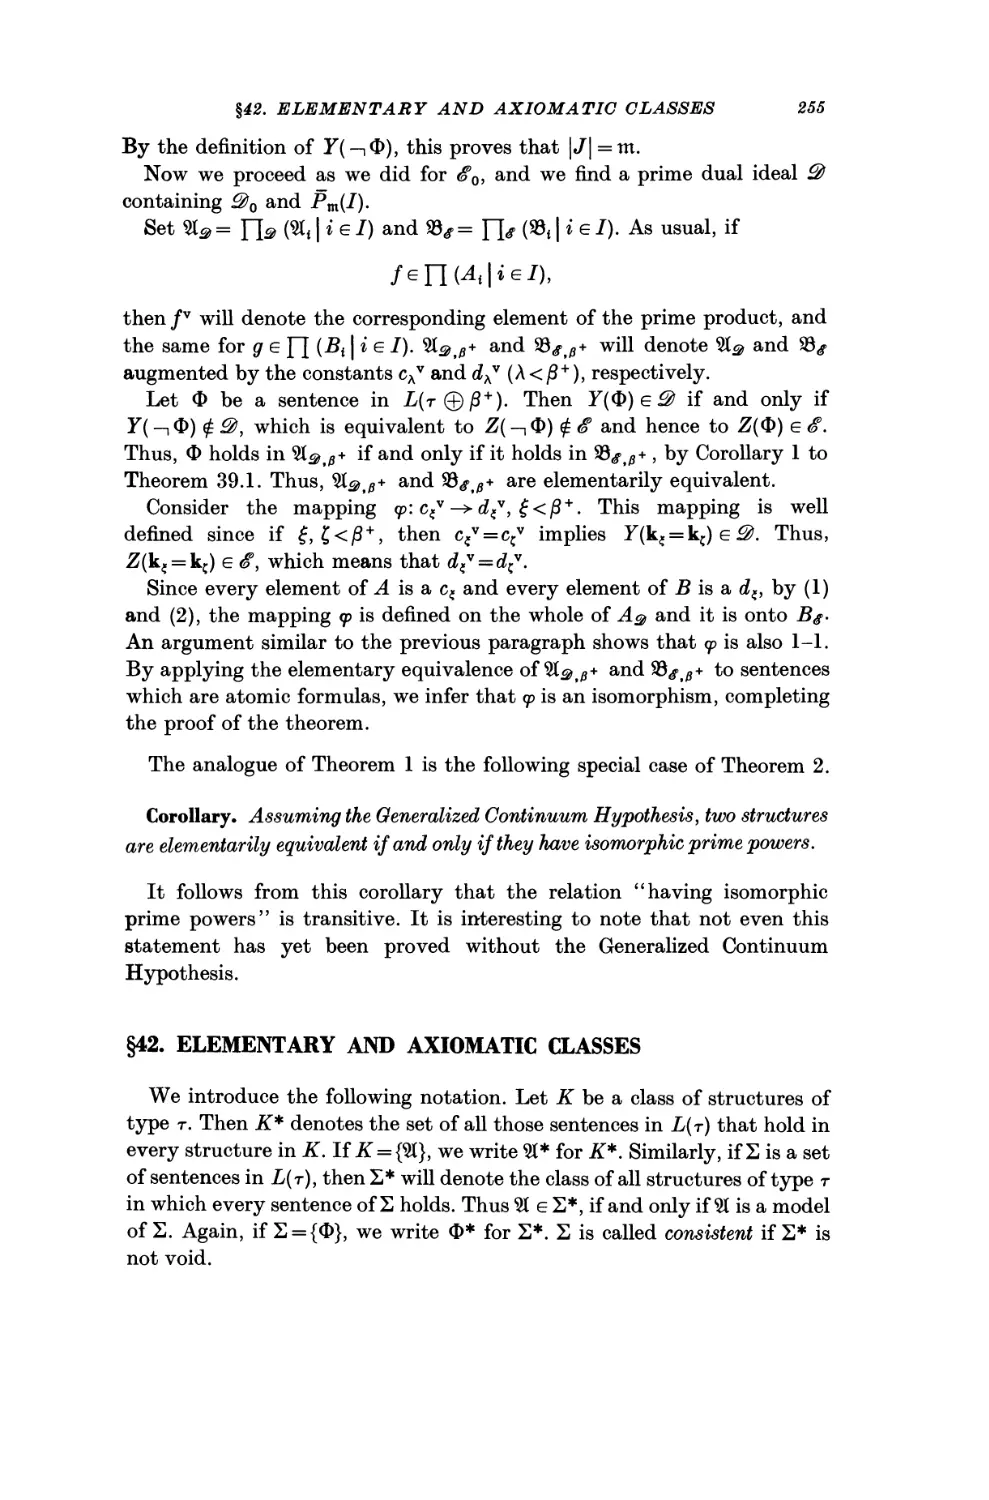 §42. Elementary and Axiomatic Classes